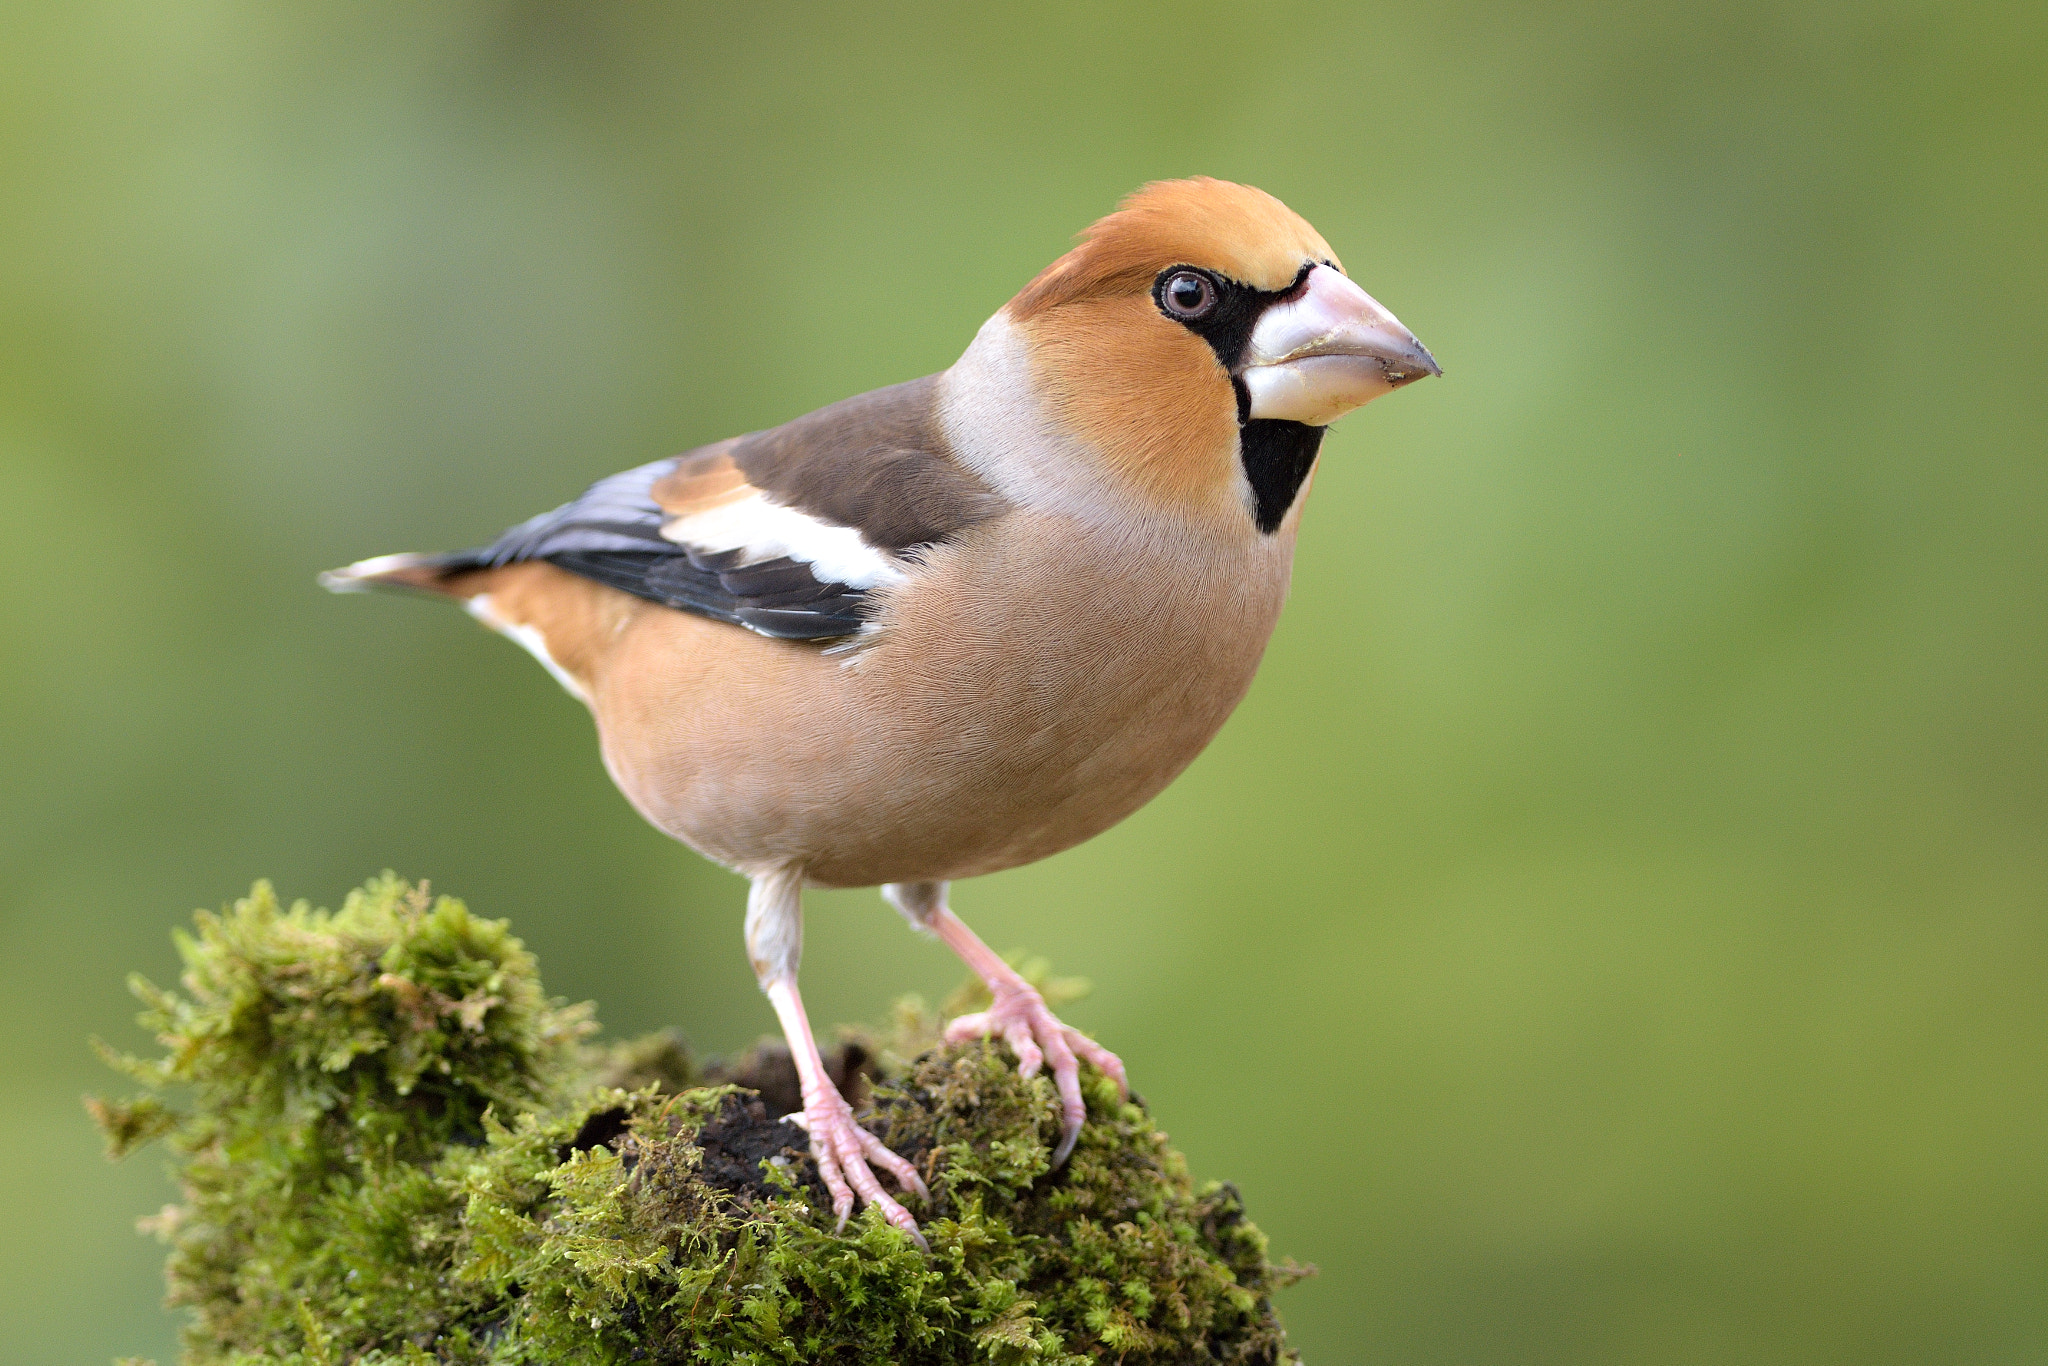 Nikon D7200 sample photo. Hawfinch on green photography